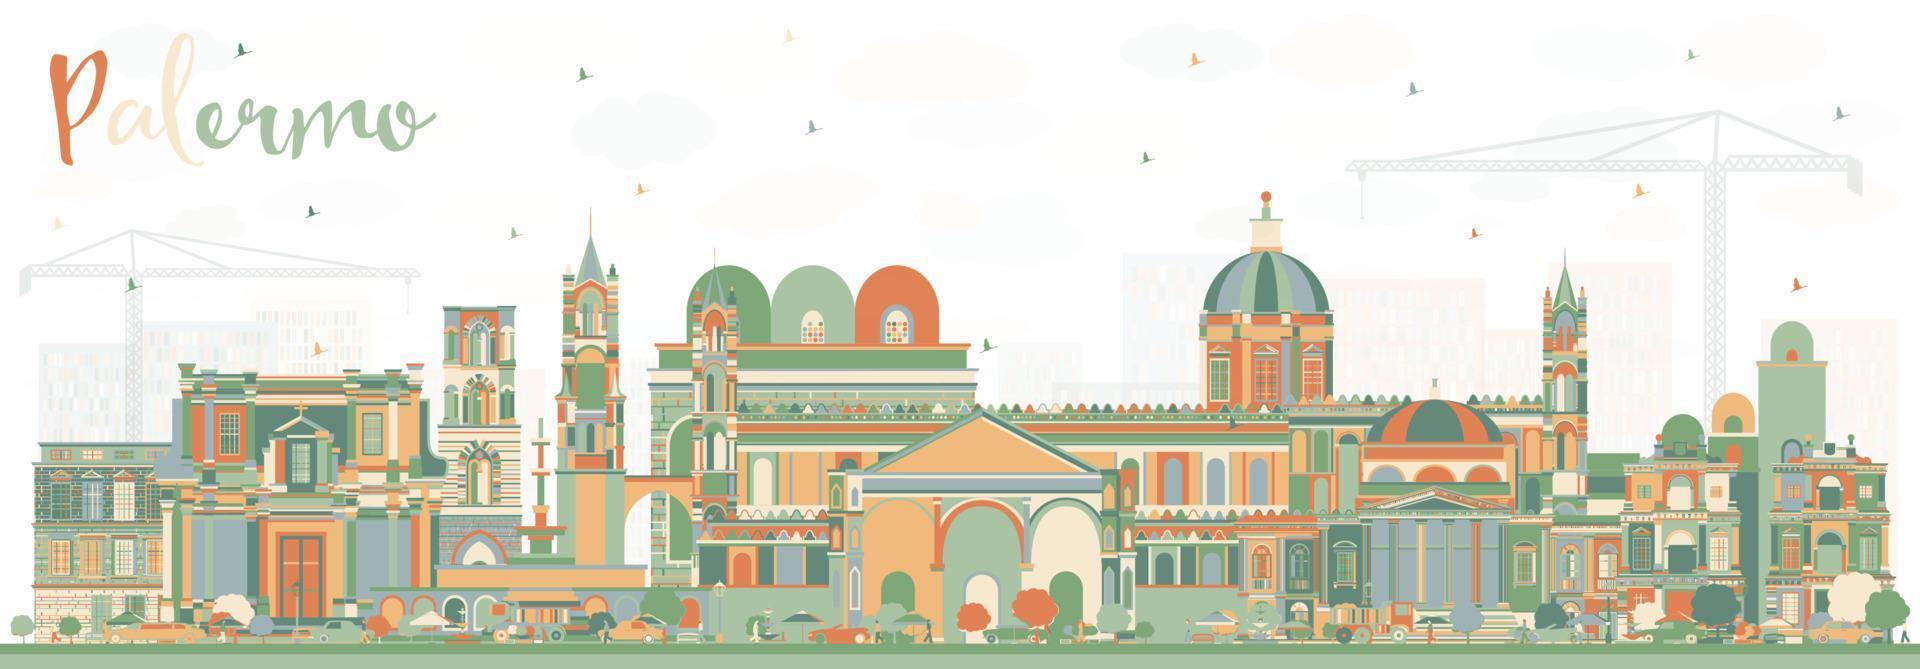 Palermo Italy City Skyline with Color Buildings. vector